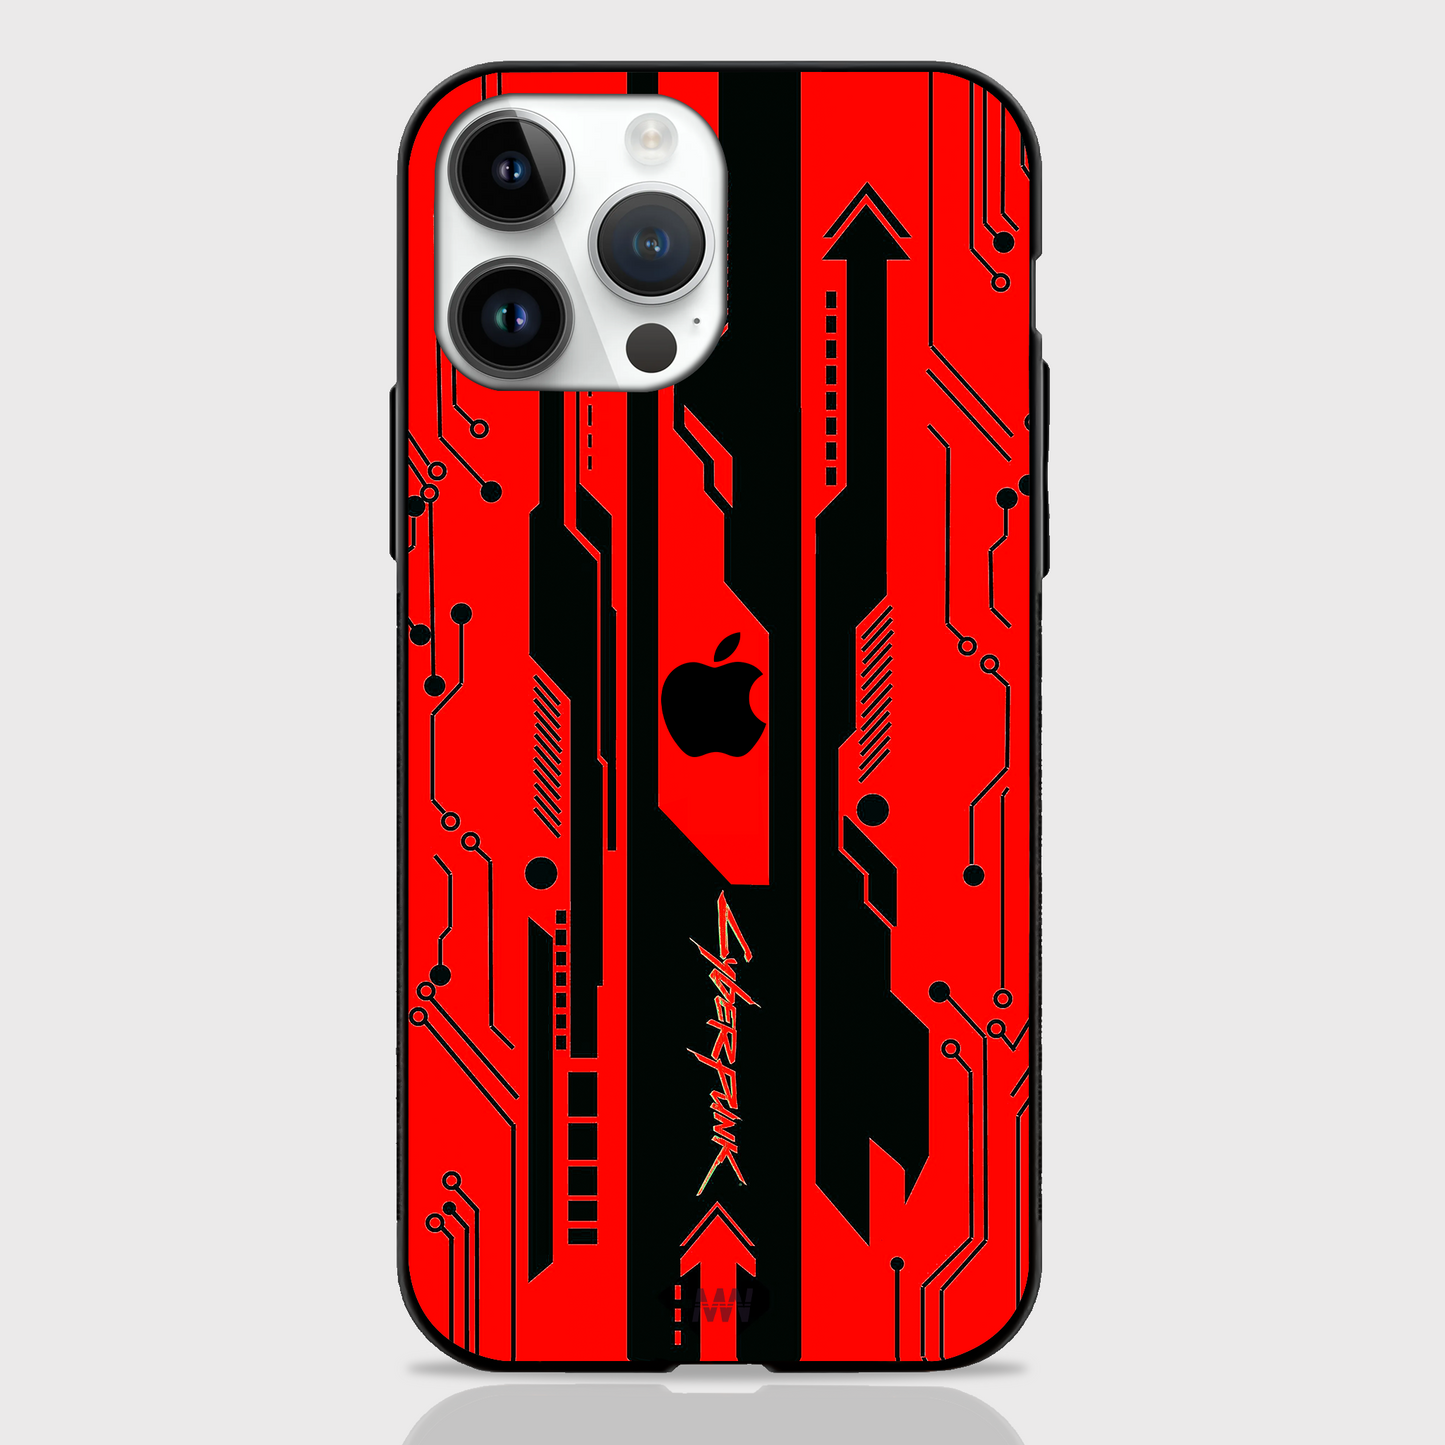 Gaming Abstract Theme GLASS CASES (Orange, Yellow, Black, Red & White)